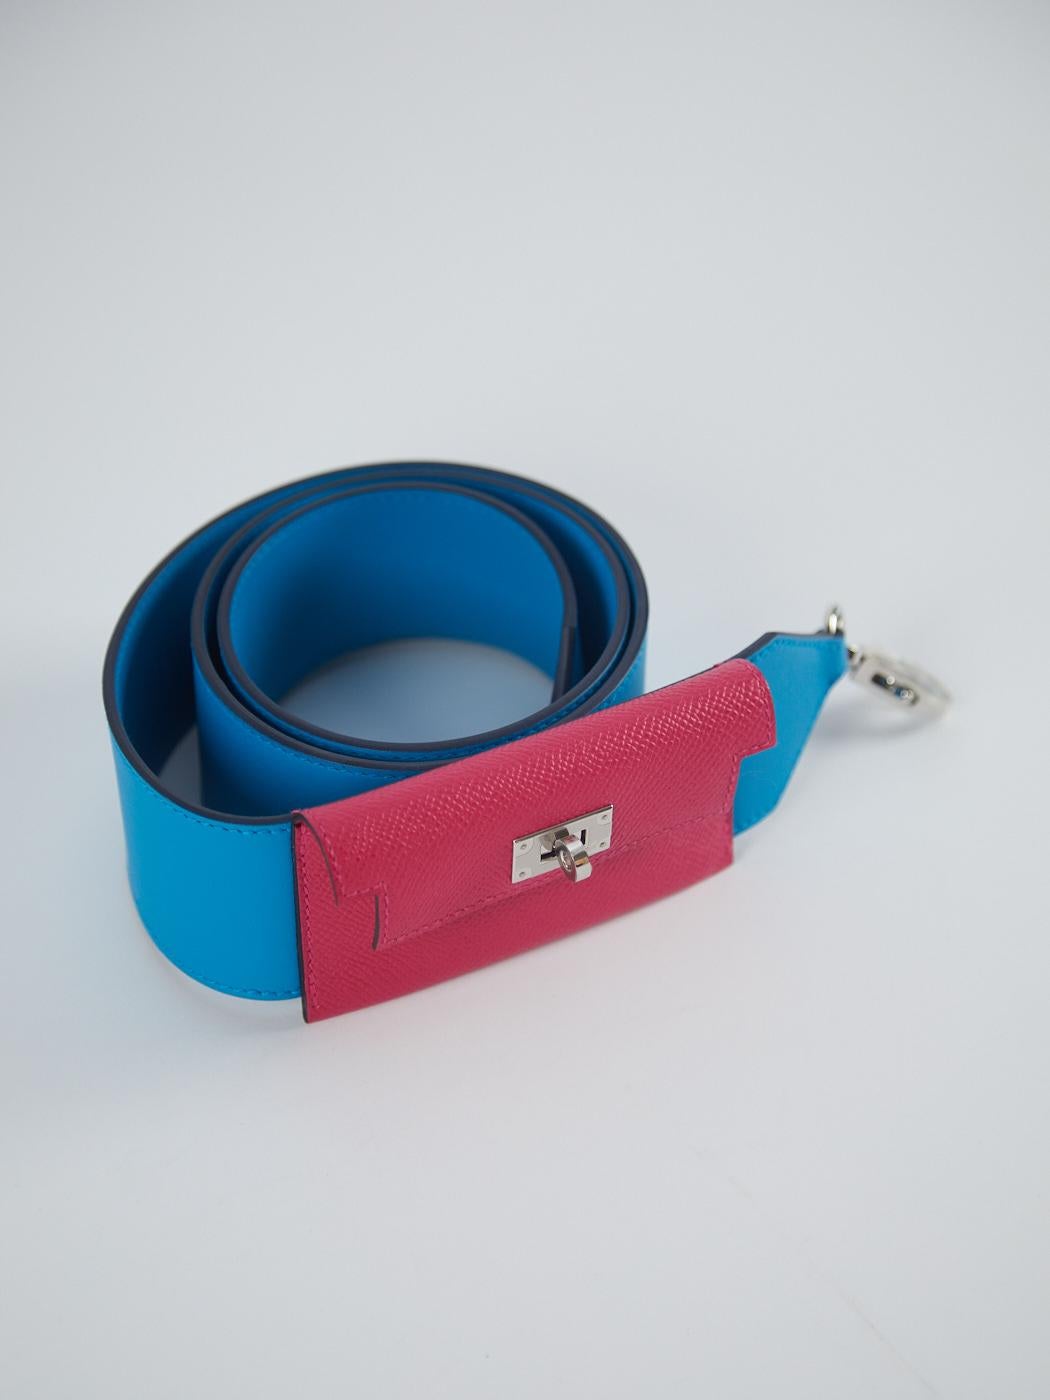 Hermès Kelly Pocket Strap 105cm in Blue Frida & Rose Mexico

Epsom and Swift Leather with Palladium Hardware

Y Stamp / No receipt

Accompanied By: Hermes box, dustbag and ribbon

Measurements: L 42